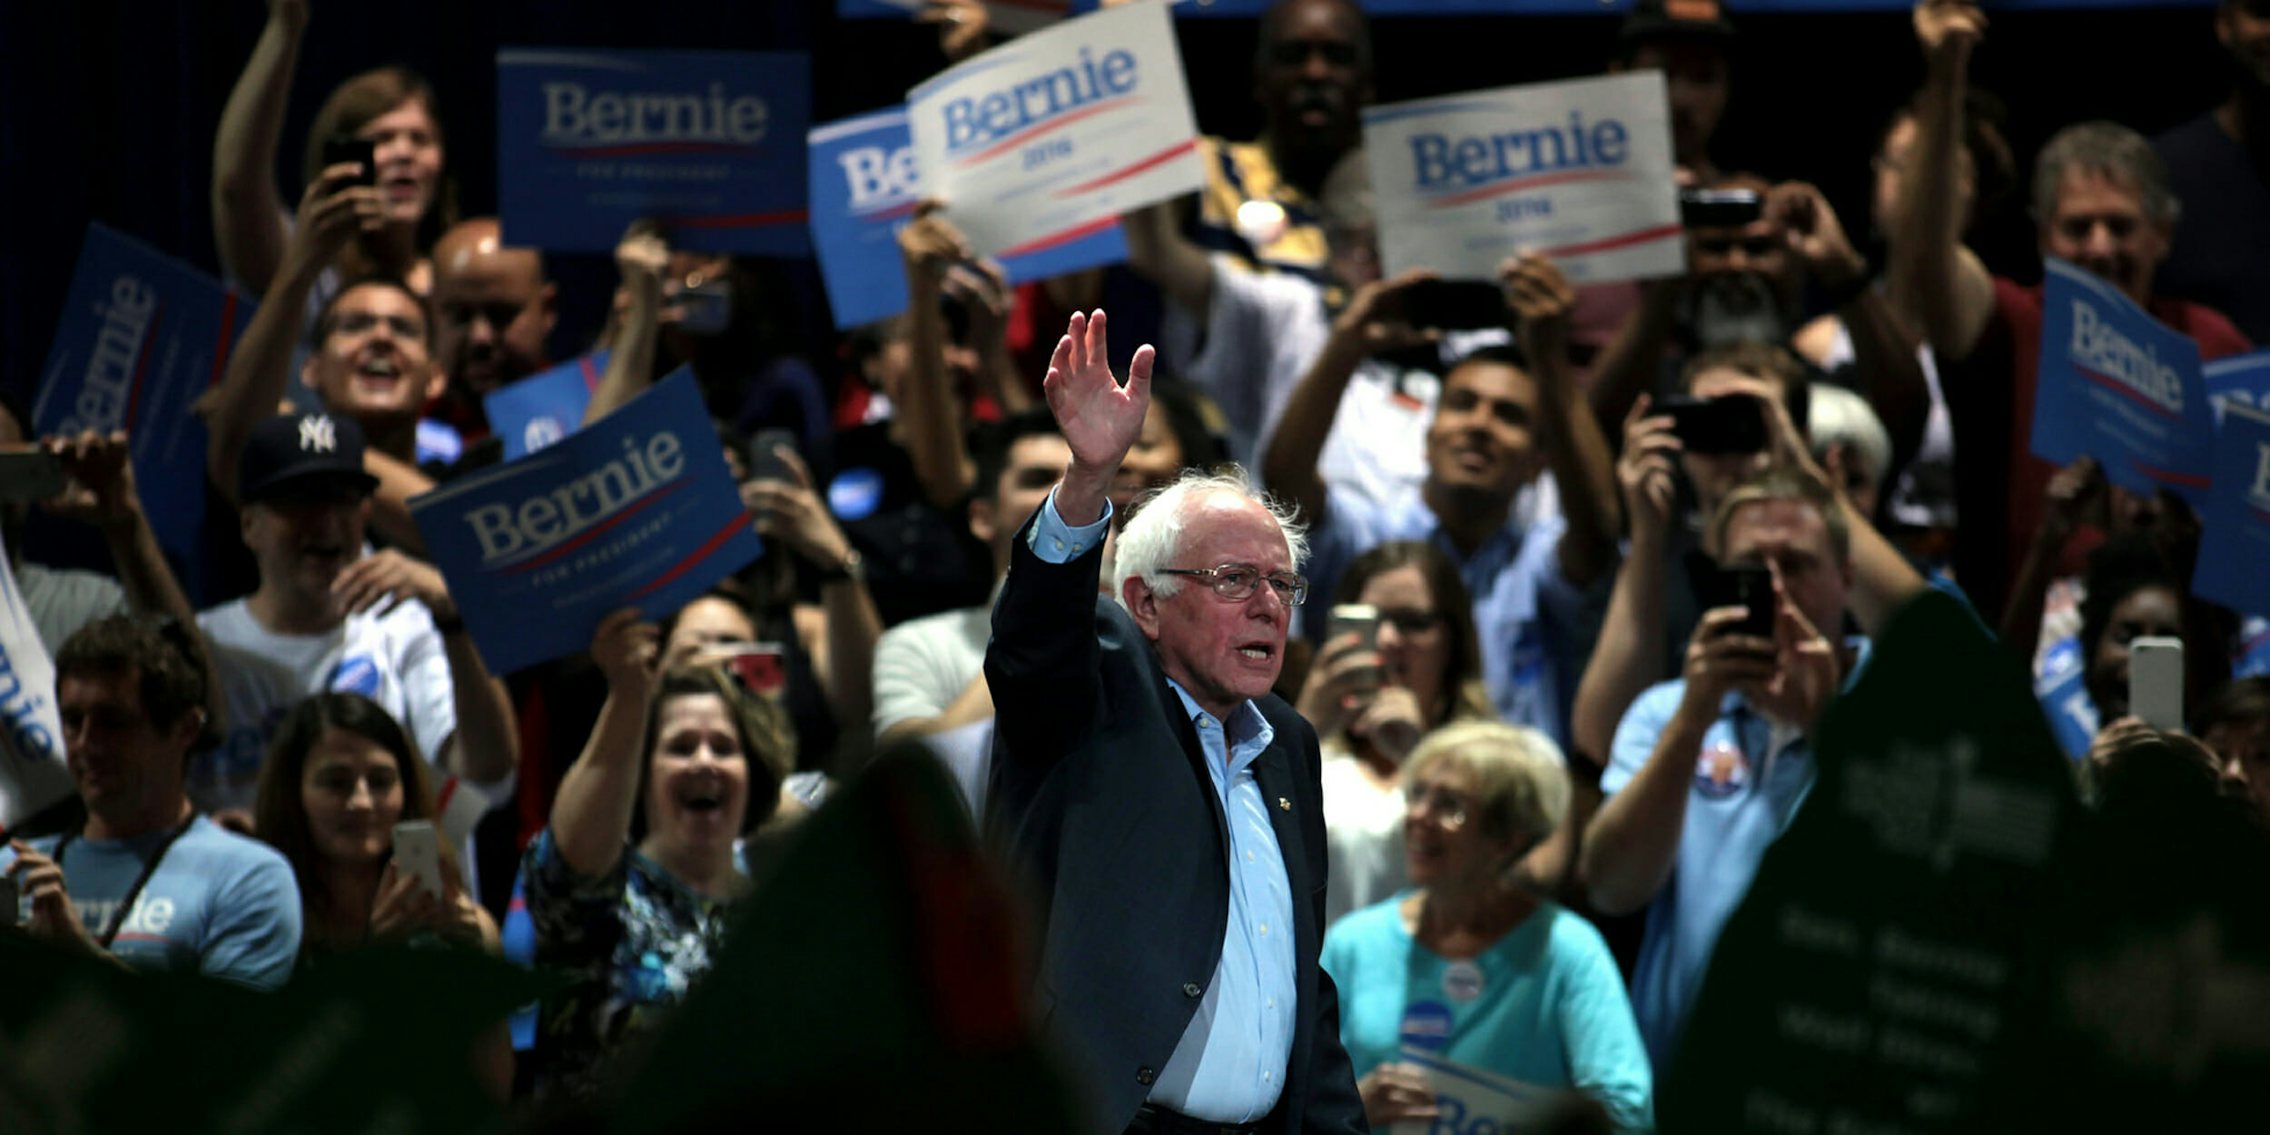 Bernie Sanders supporters need to be unified with Democrats, officials say.